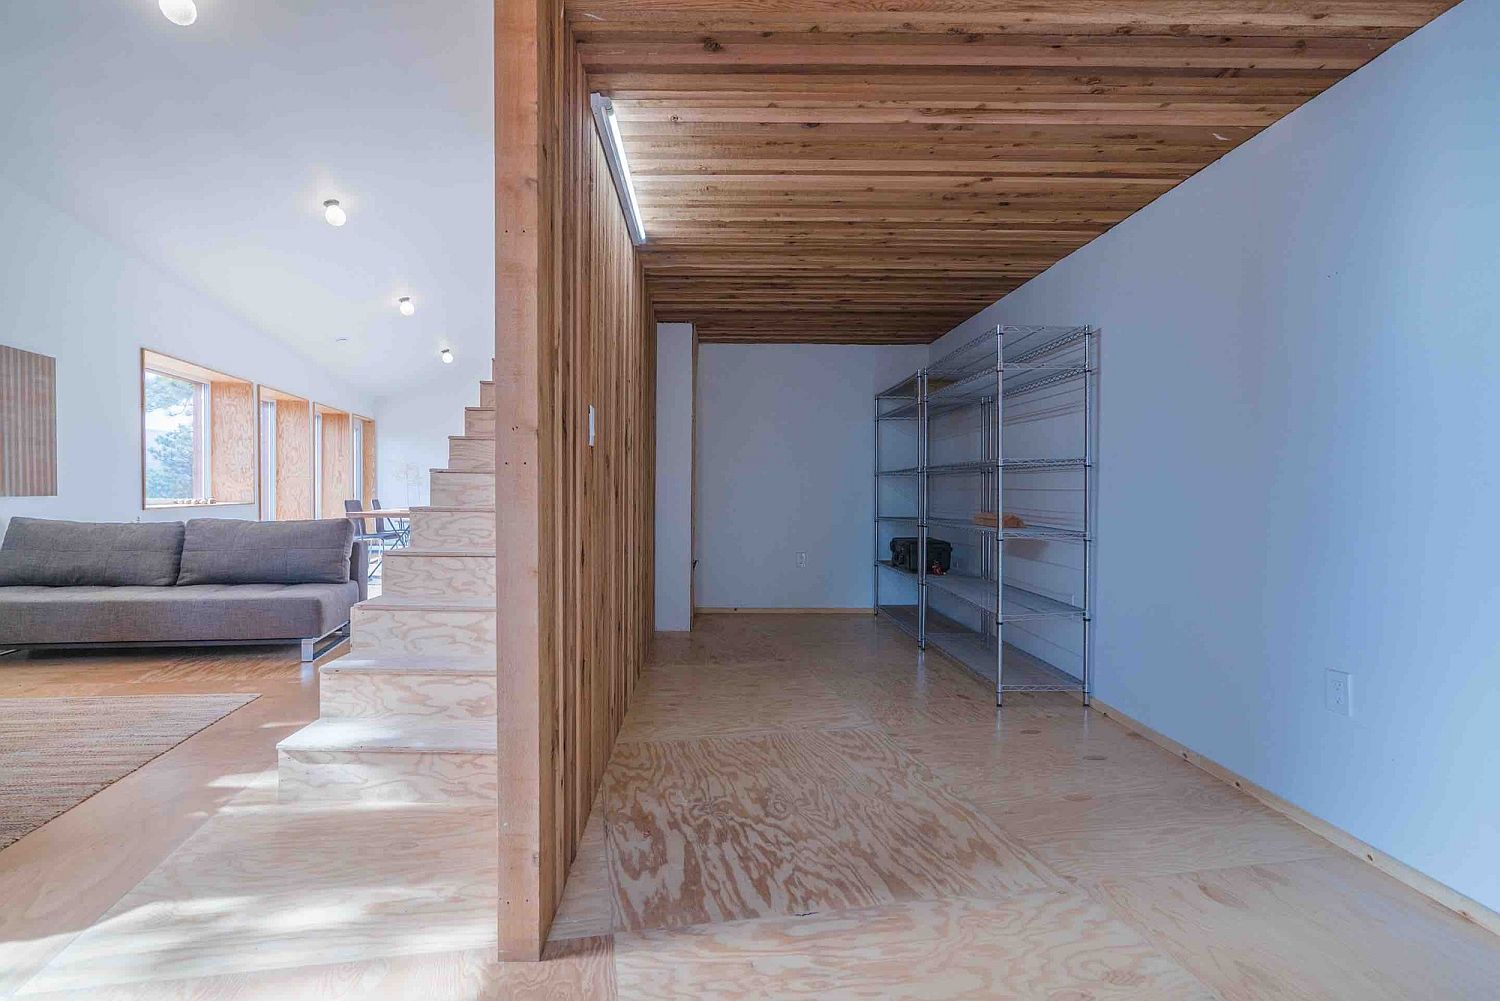 Minimal and cozy interior clad in FSC plywood, cedar and tile